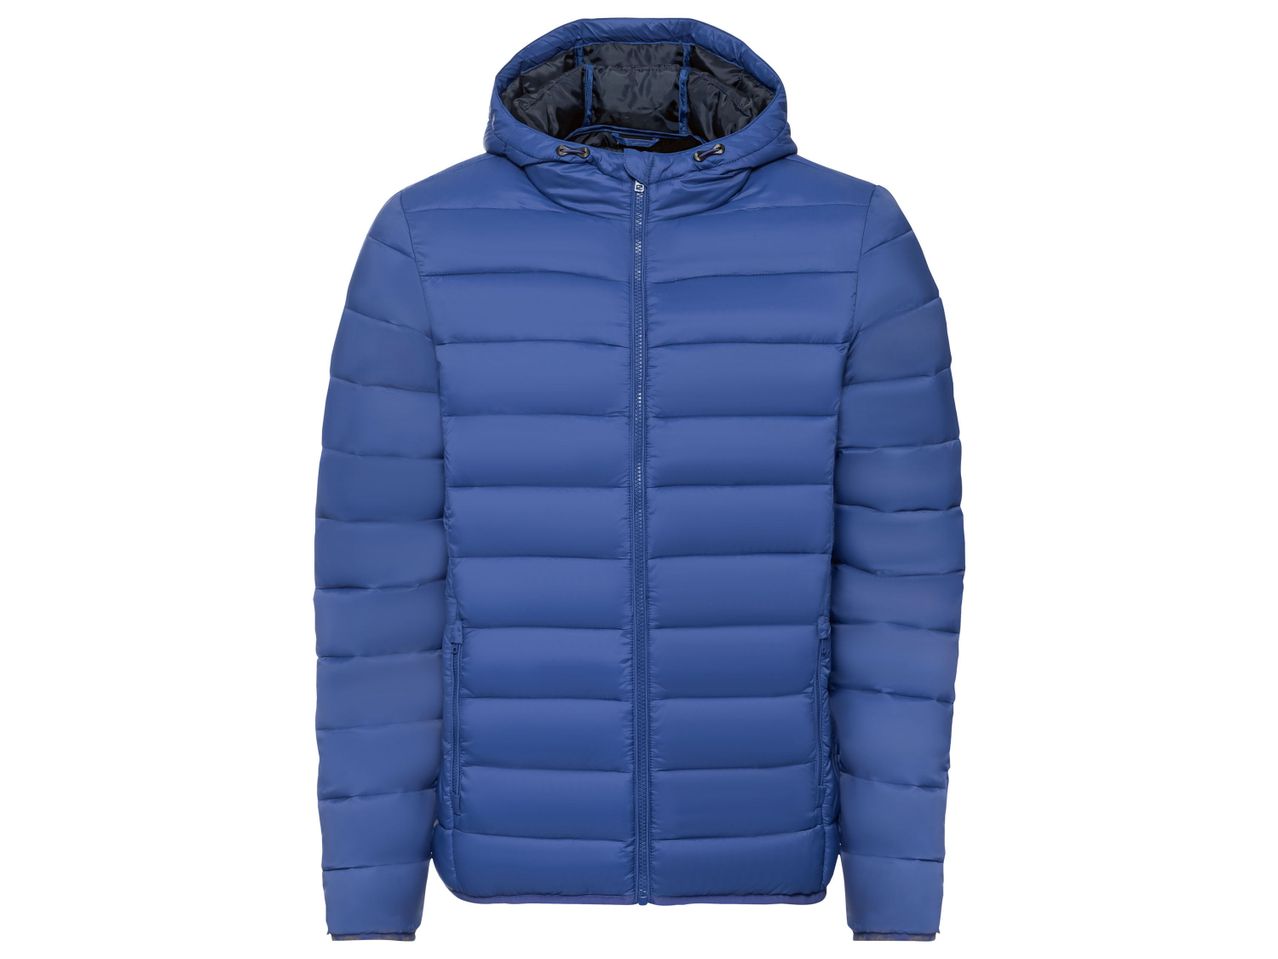 Go to full screen view: Men’s Lightweight Jacket - Image 3